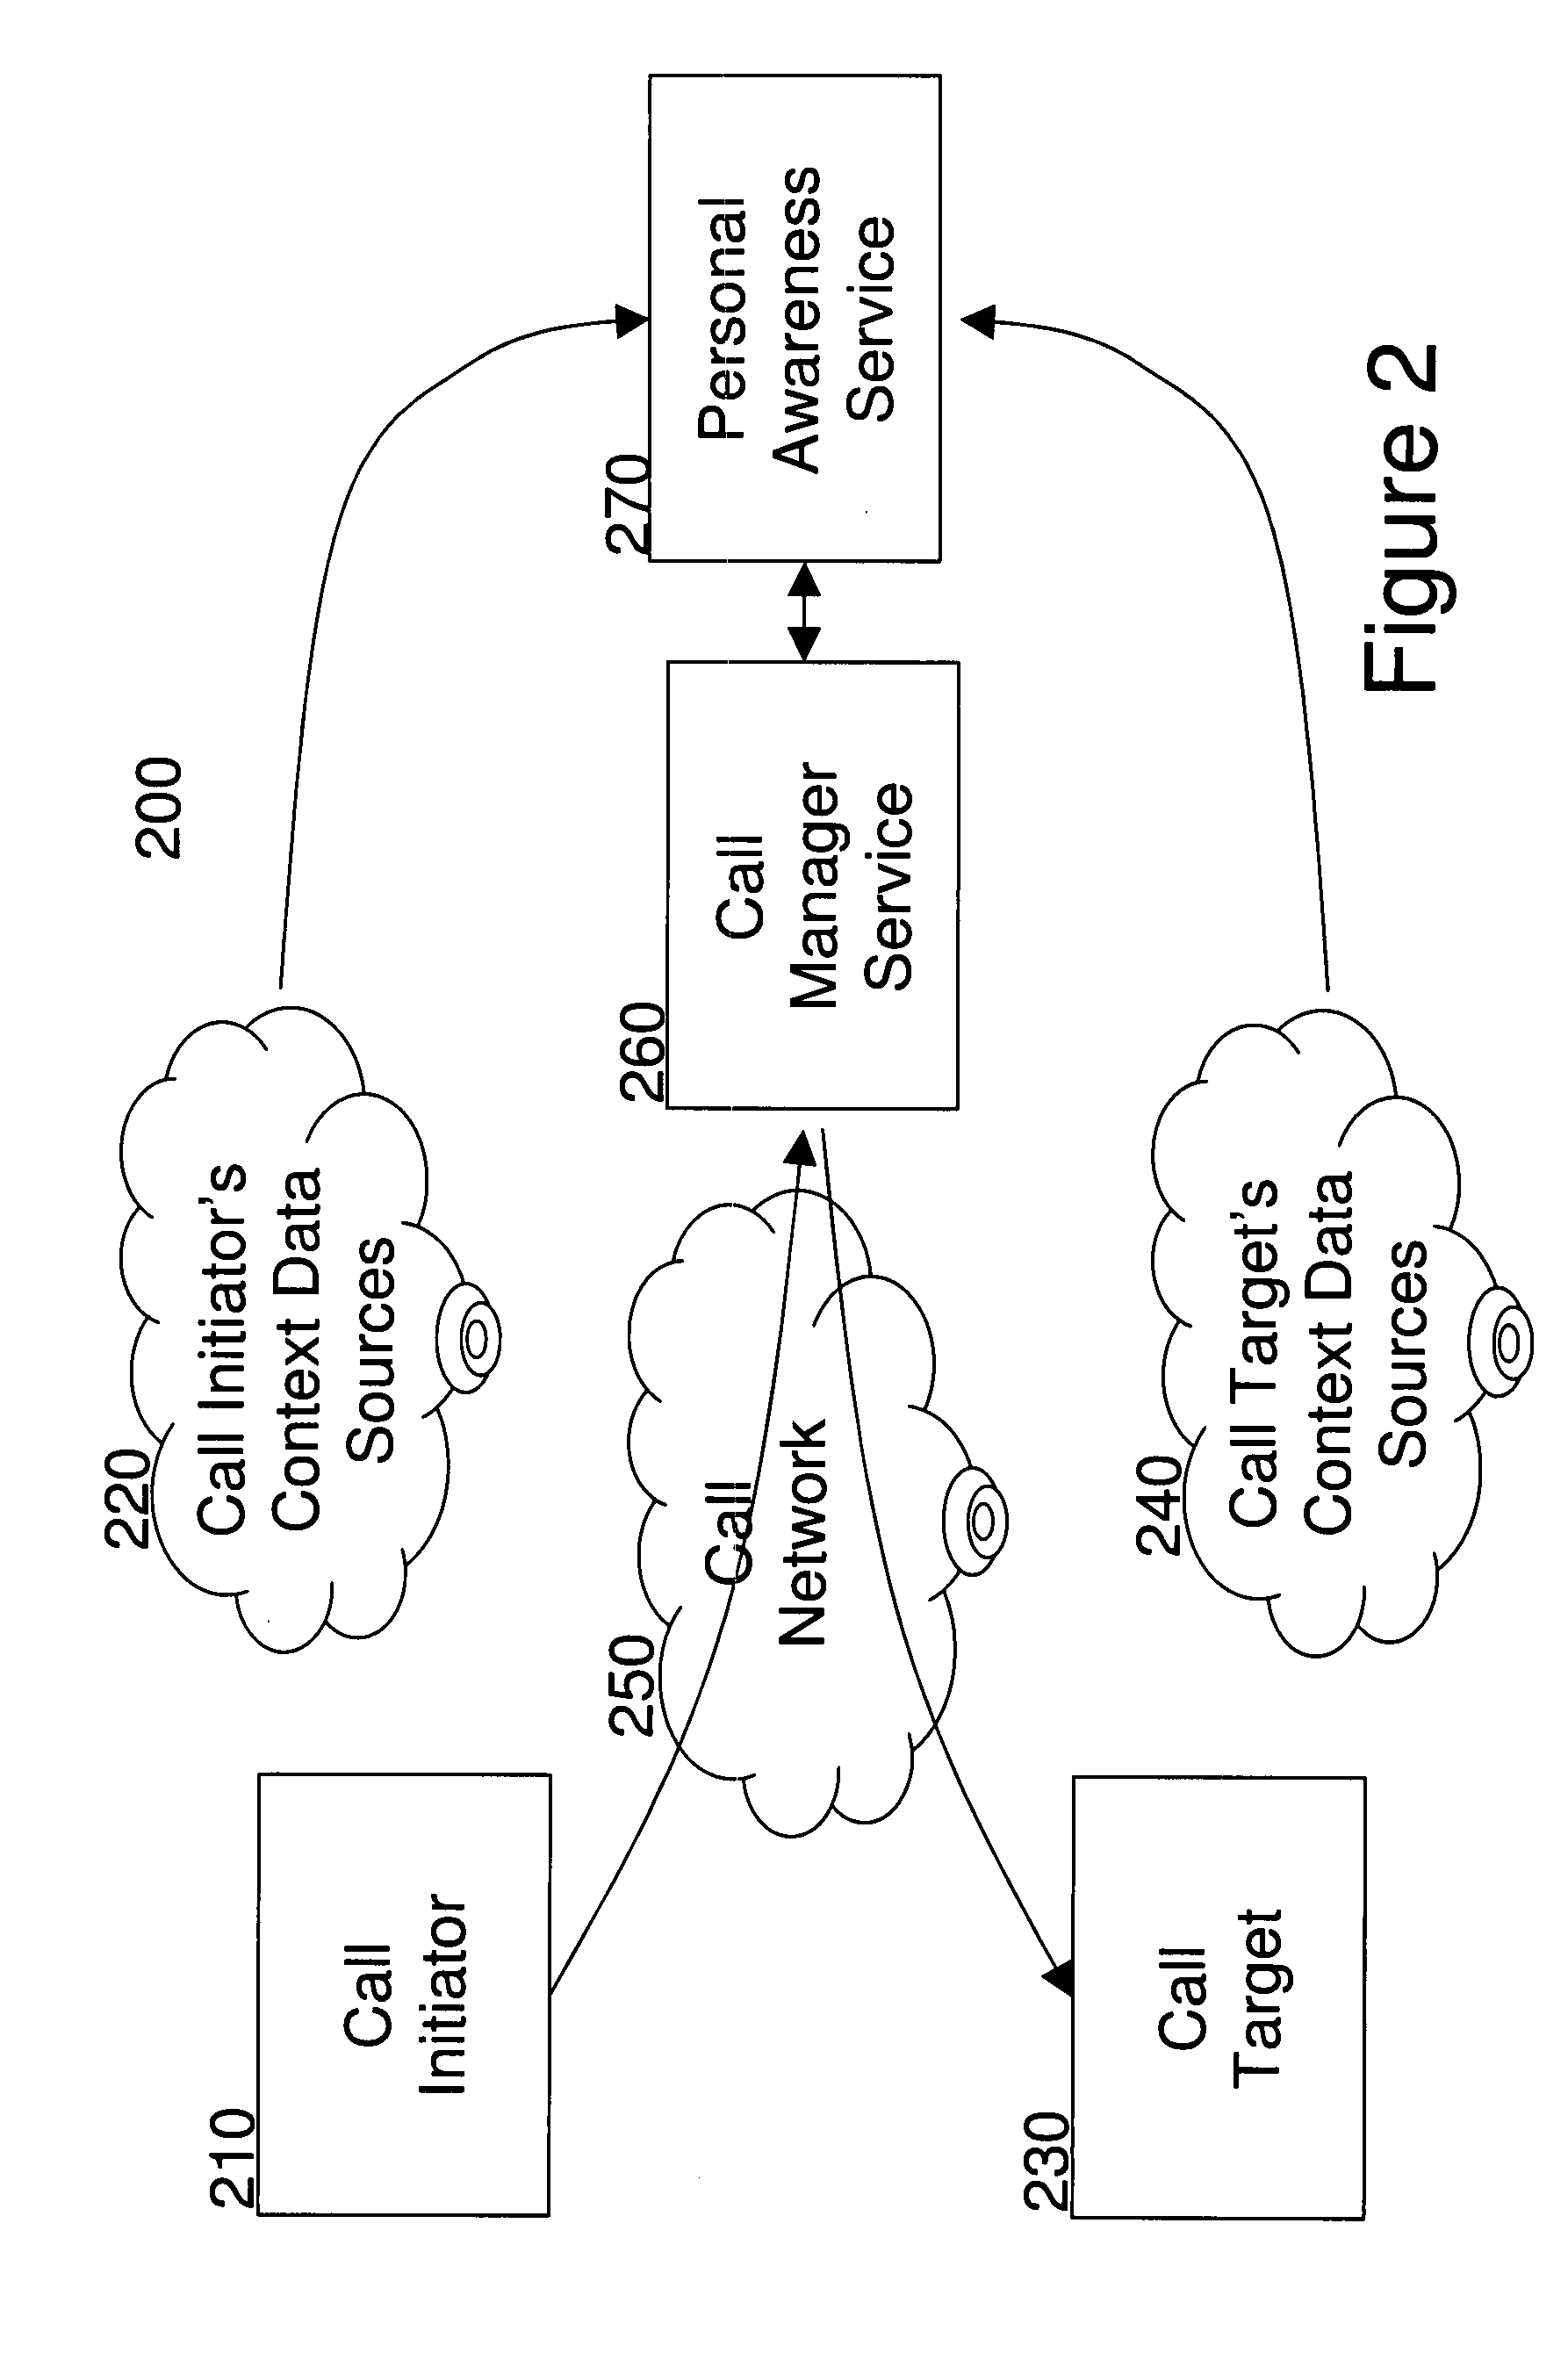 Method, system and service for achieving synchronous communication responsive to dynamic status